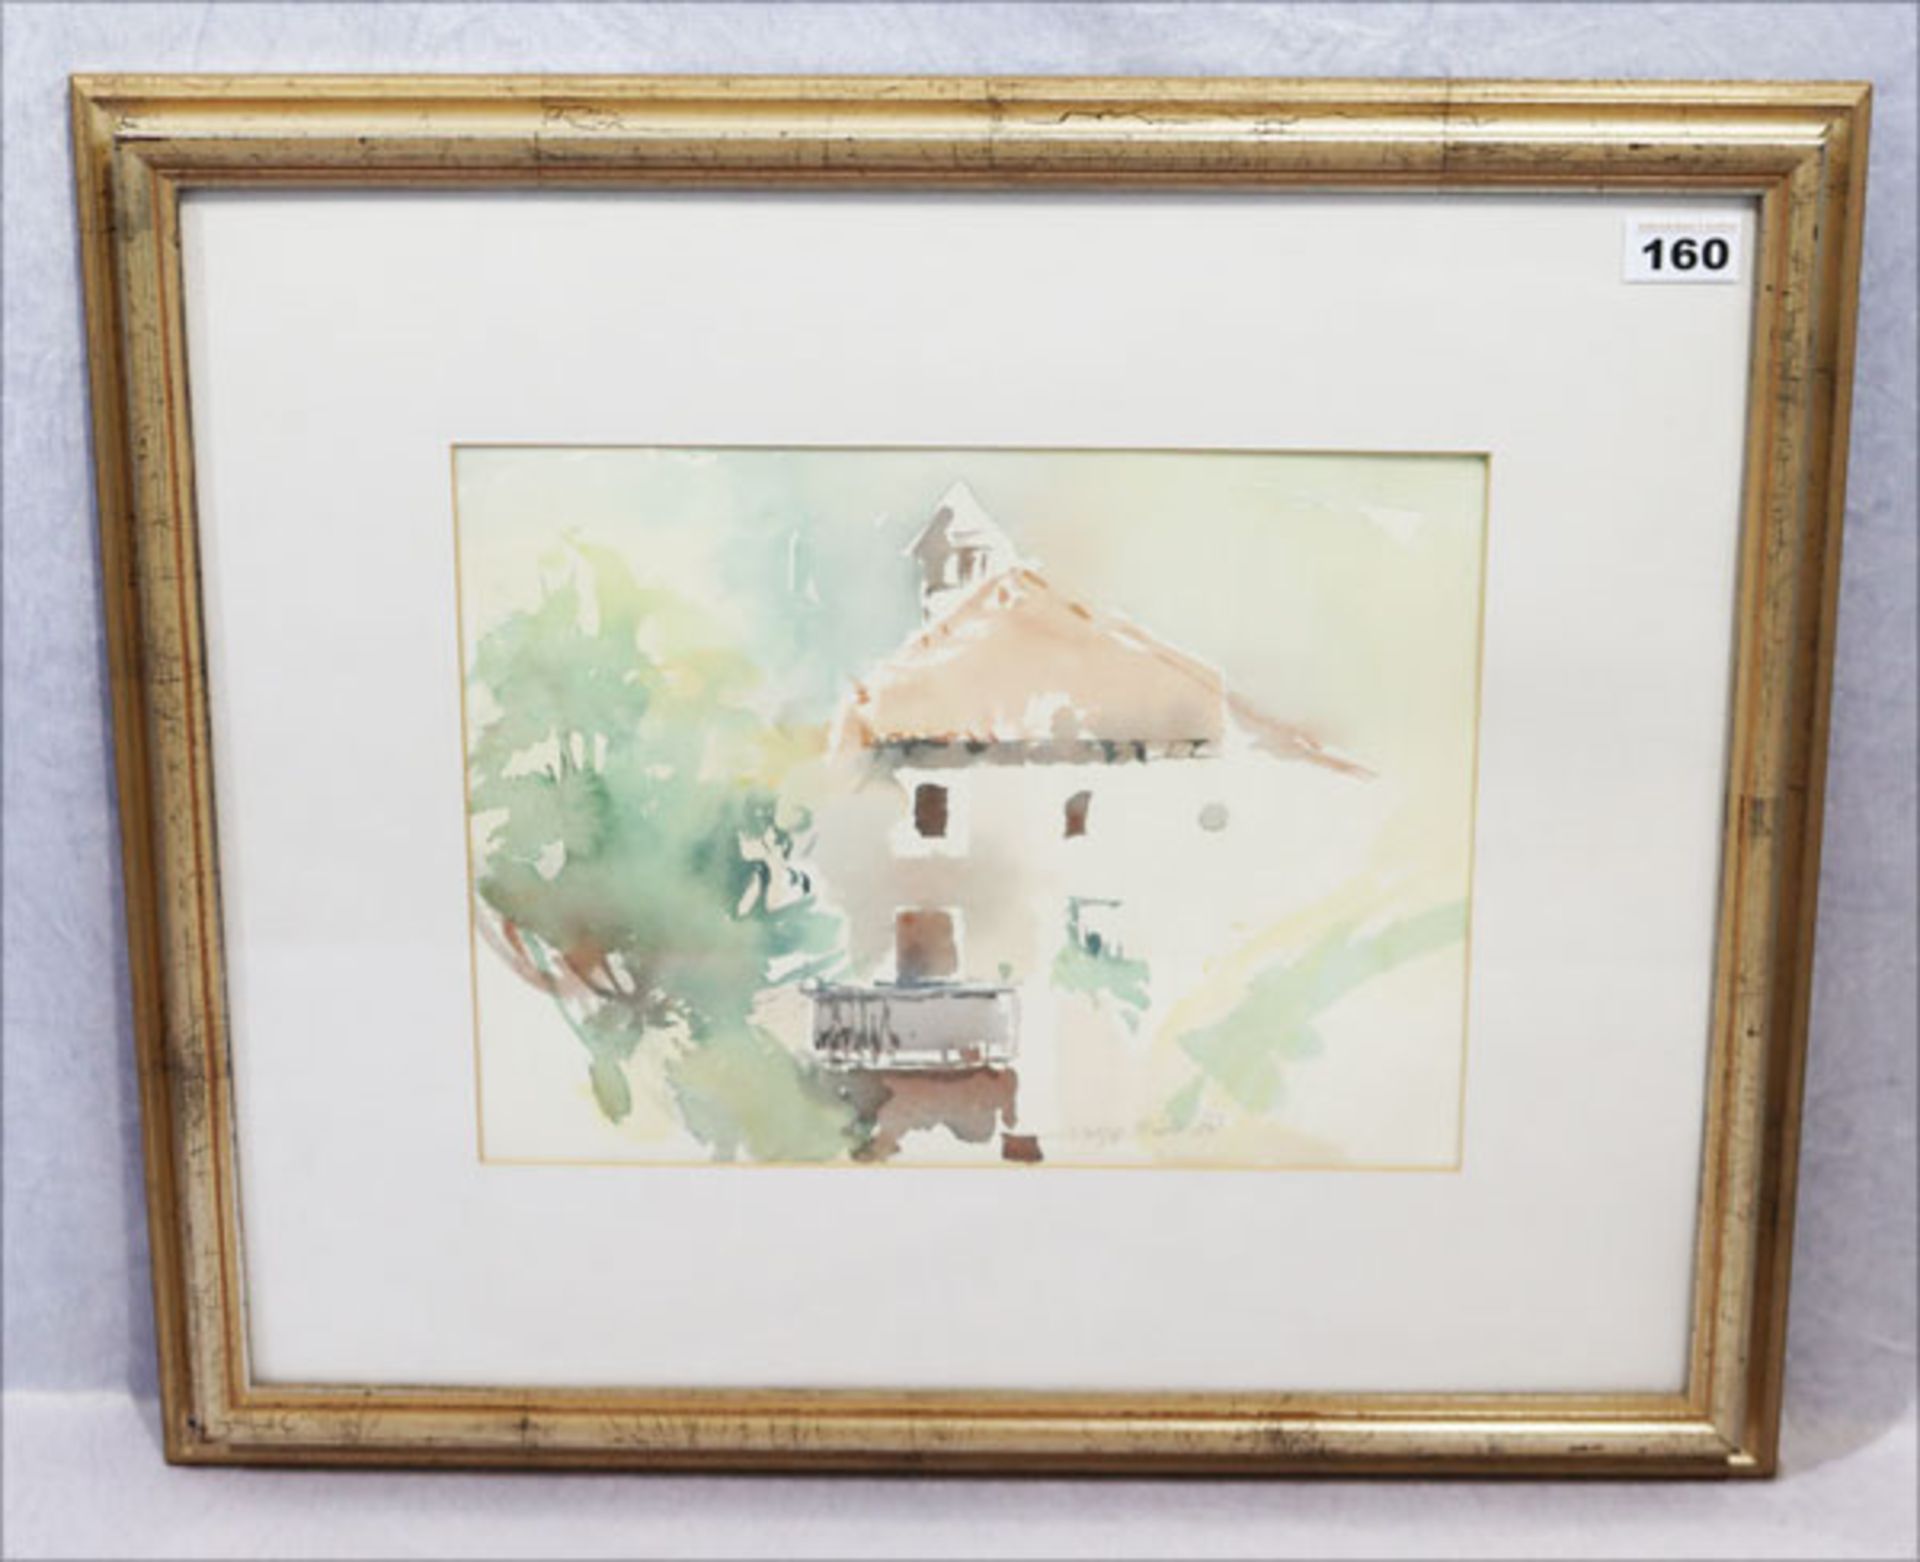 Aquarell 'Haus in Sand in Taufers', signiert Theresia Volgger Fiedler, mit Passepartout unter Glas